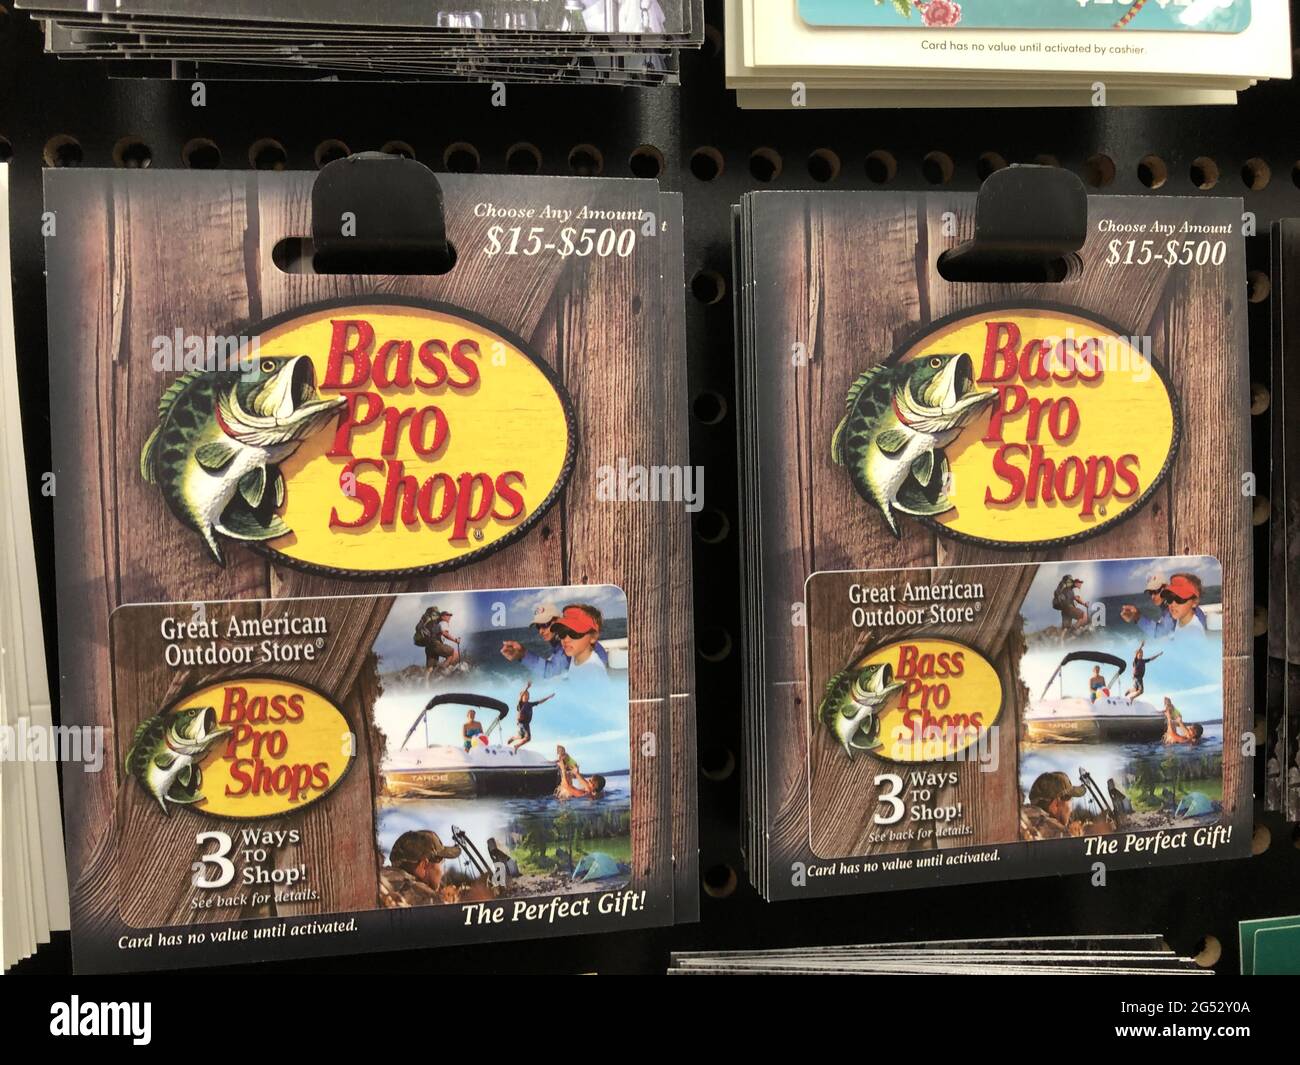 Can U Use Bass Pro Gift Cards At Cabelas Gift Cards